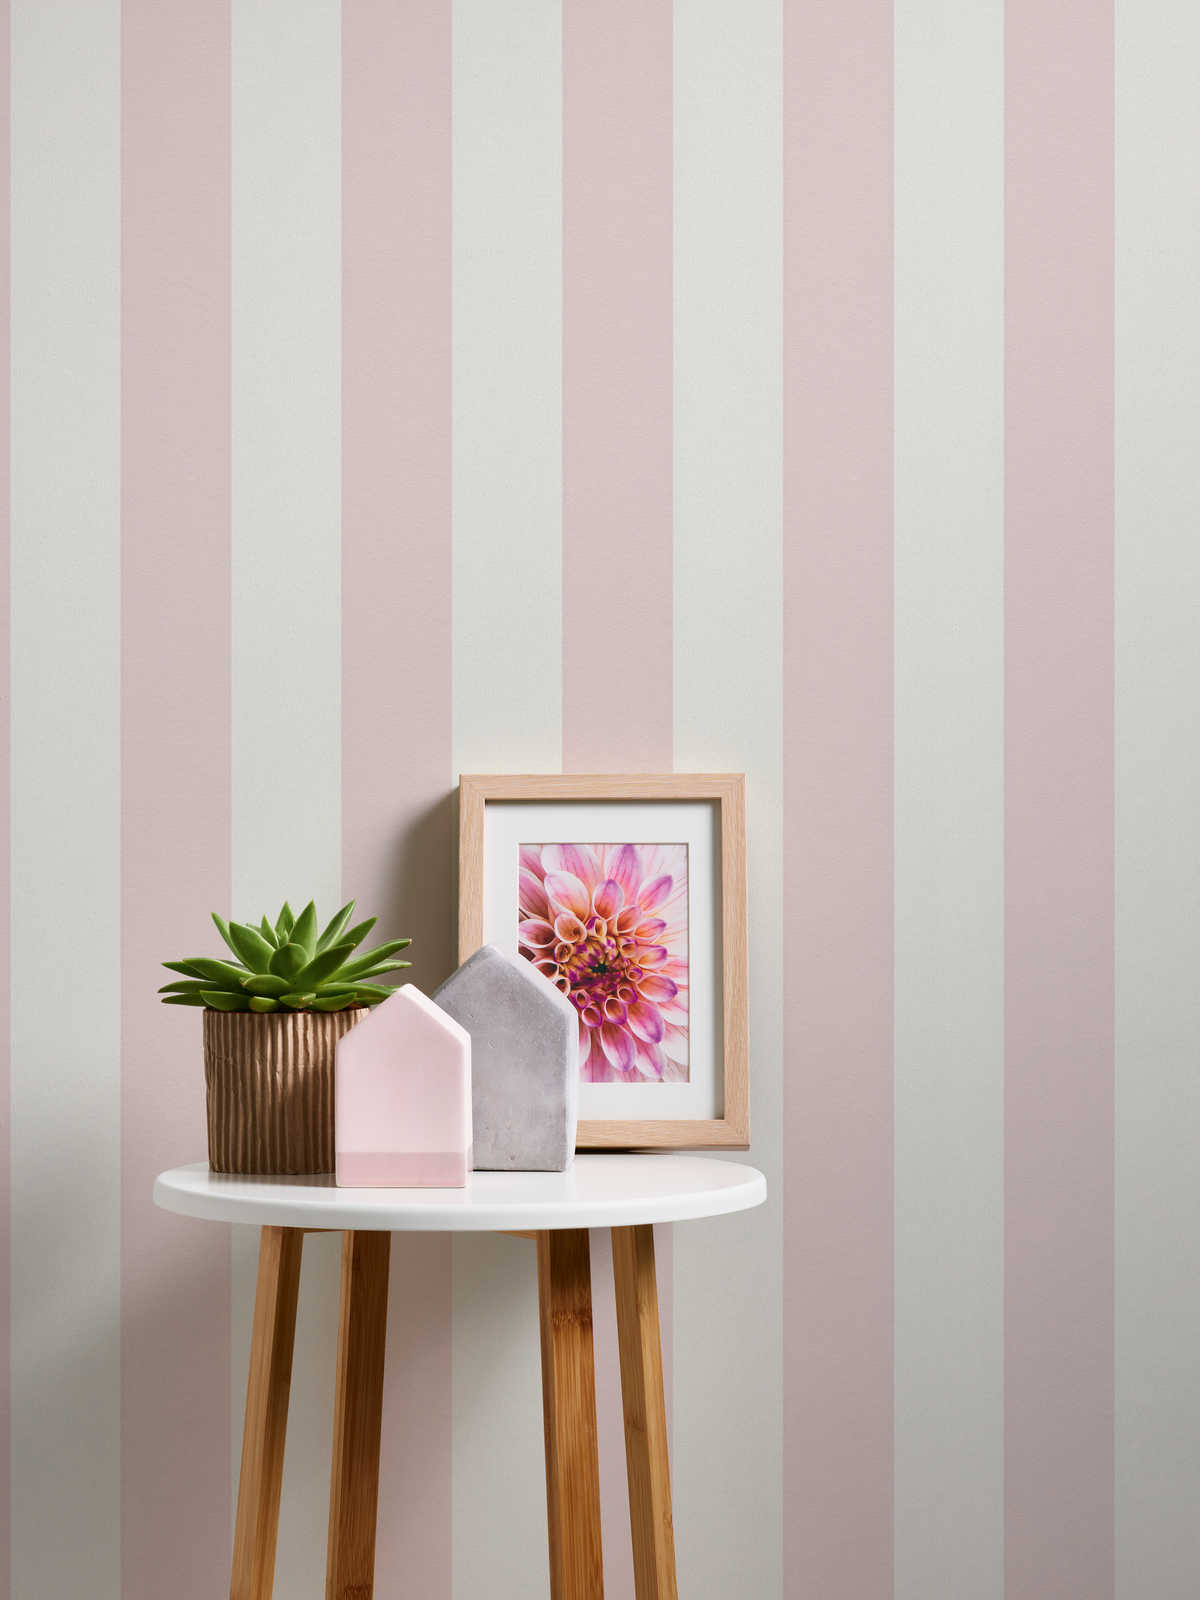             Stripes wallpaper with textured pattern, block stripes pink & white
        